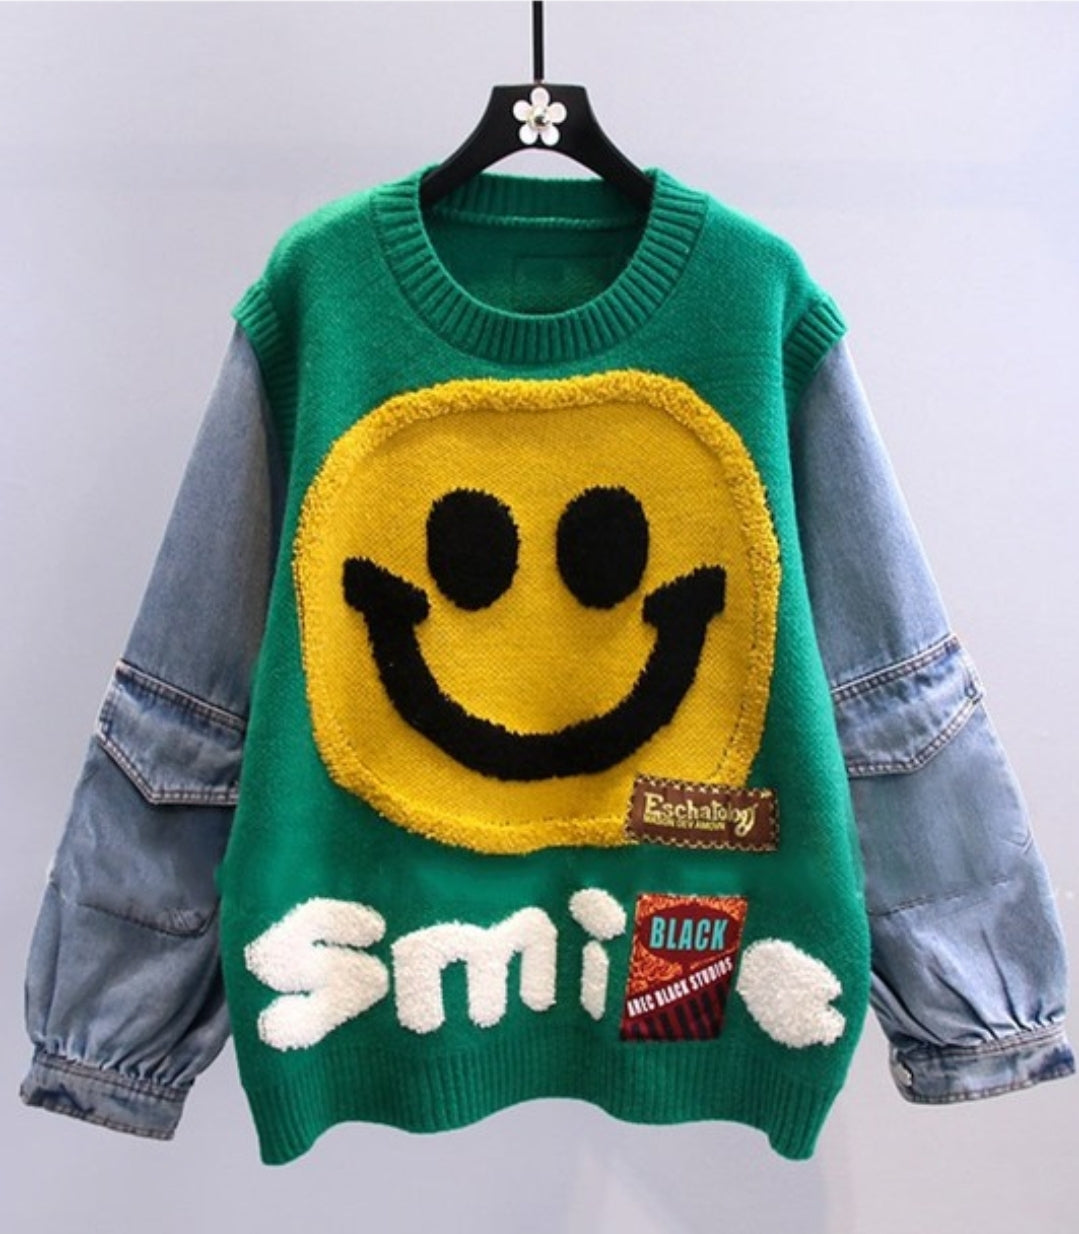 LOL Smiley face sweater